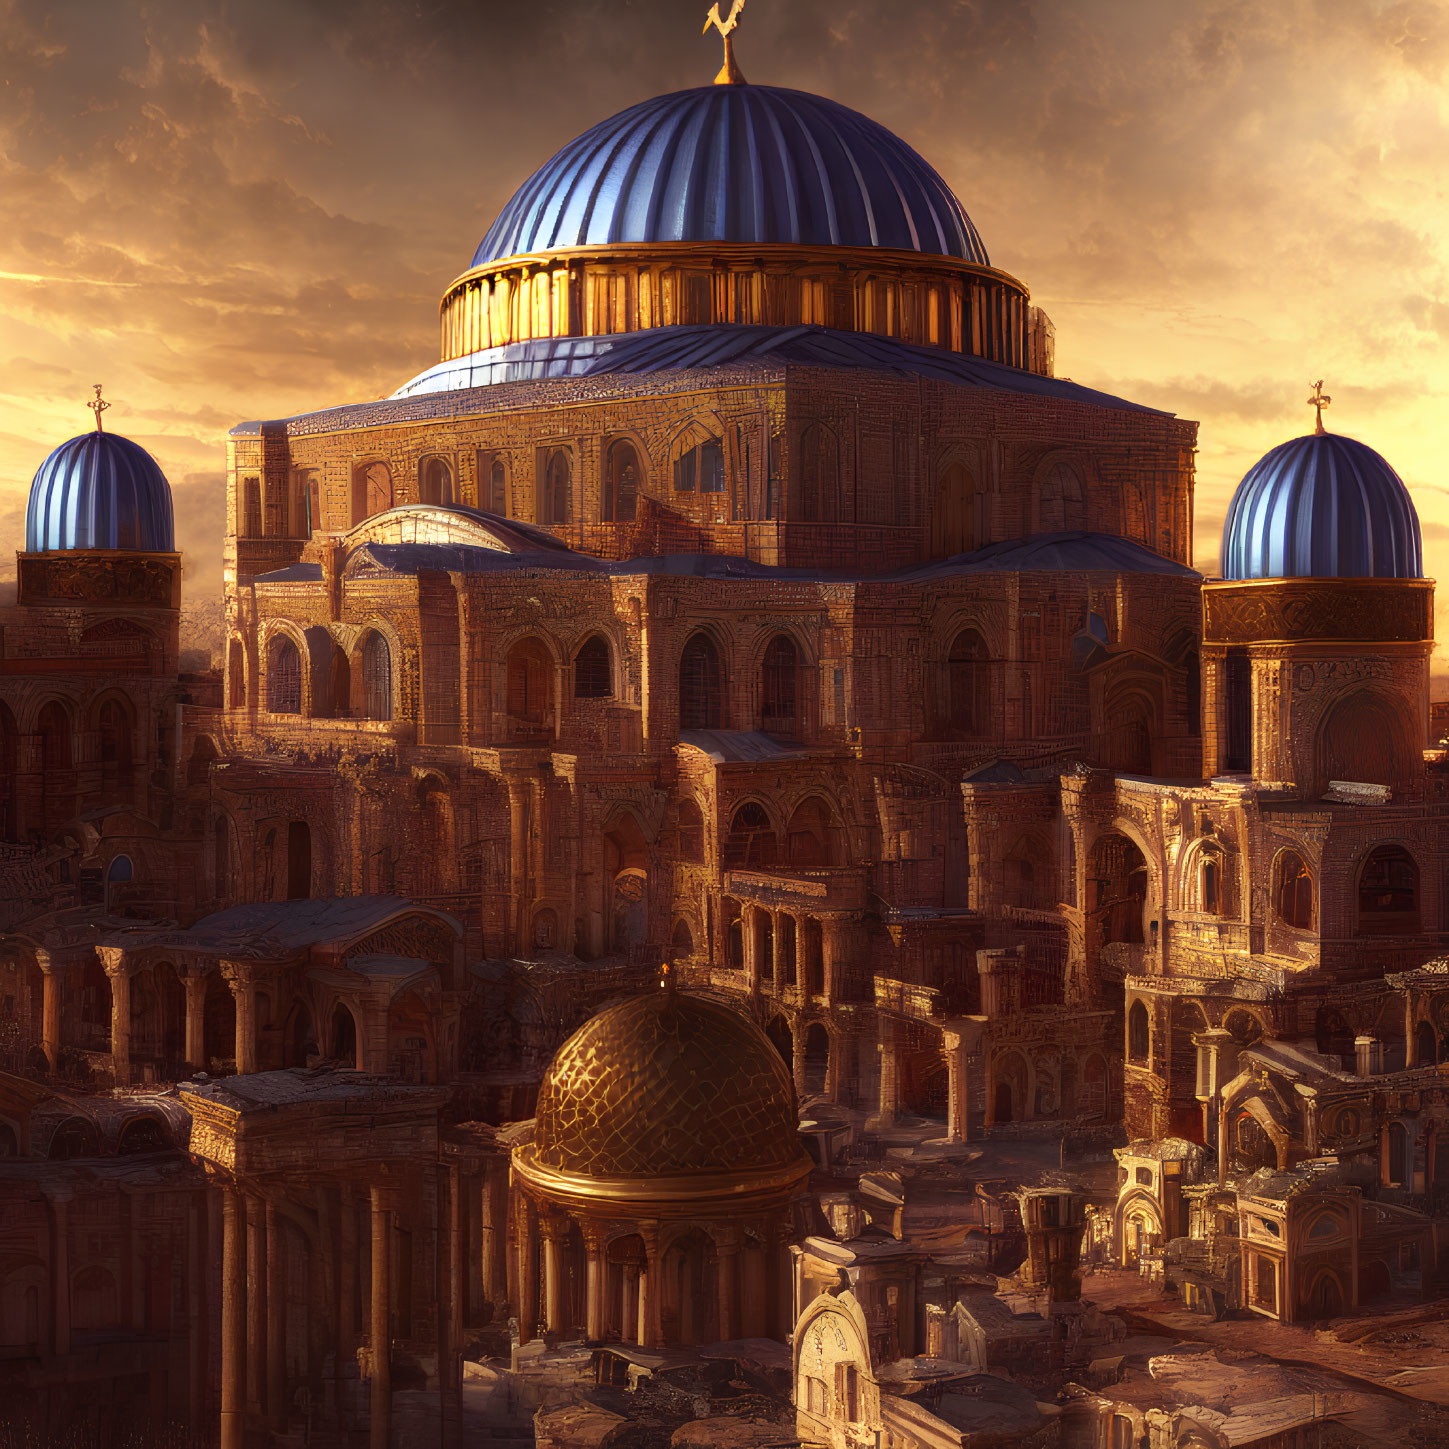 Blue-domed mosque with golden crescents in warm sunset light, intricate architecture, and historic ruins.